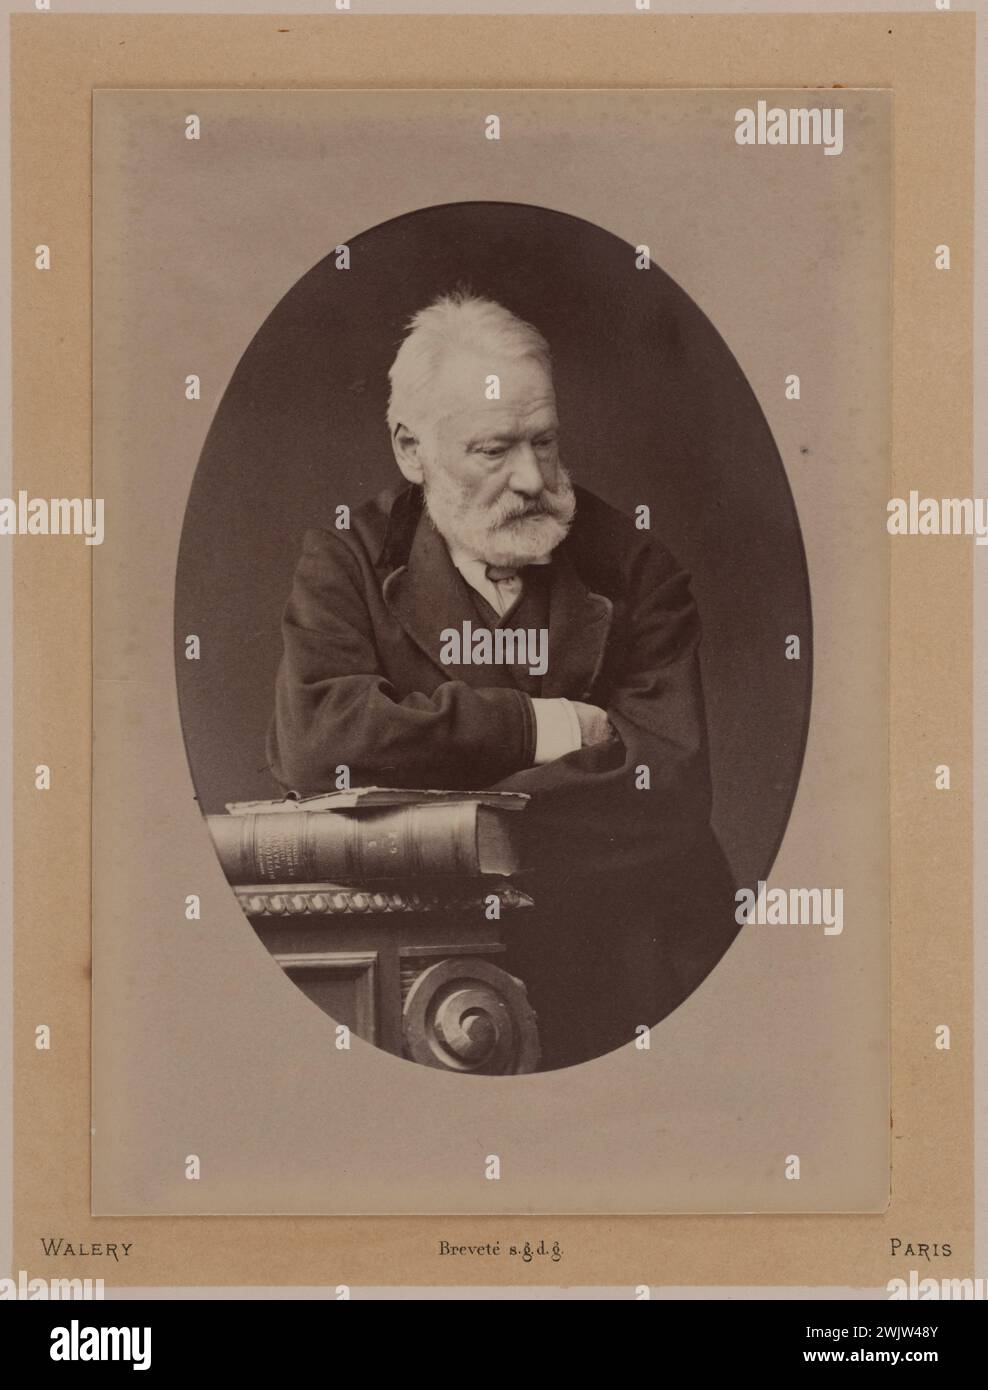 Lucien Waléry (1830-1890). Victor Hugo Standing based on a book placed on a table. EPREOVE on albumin paper, 1879. Paris, Maison de Victor Hugo. 71161-40 Leaning, standing, French writer, book, laying, portrait, table Stock Photo